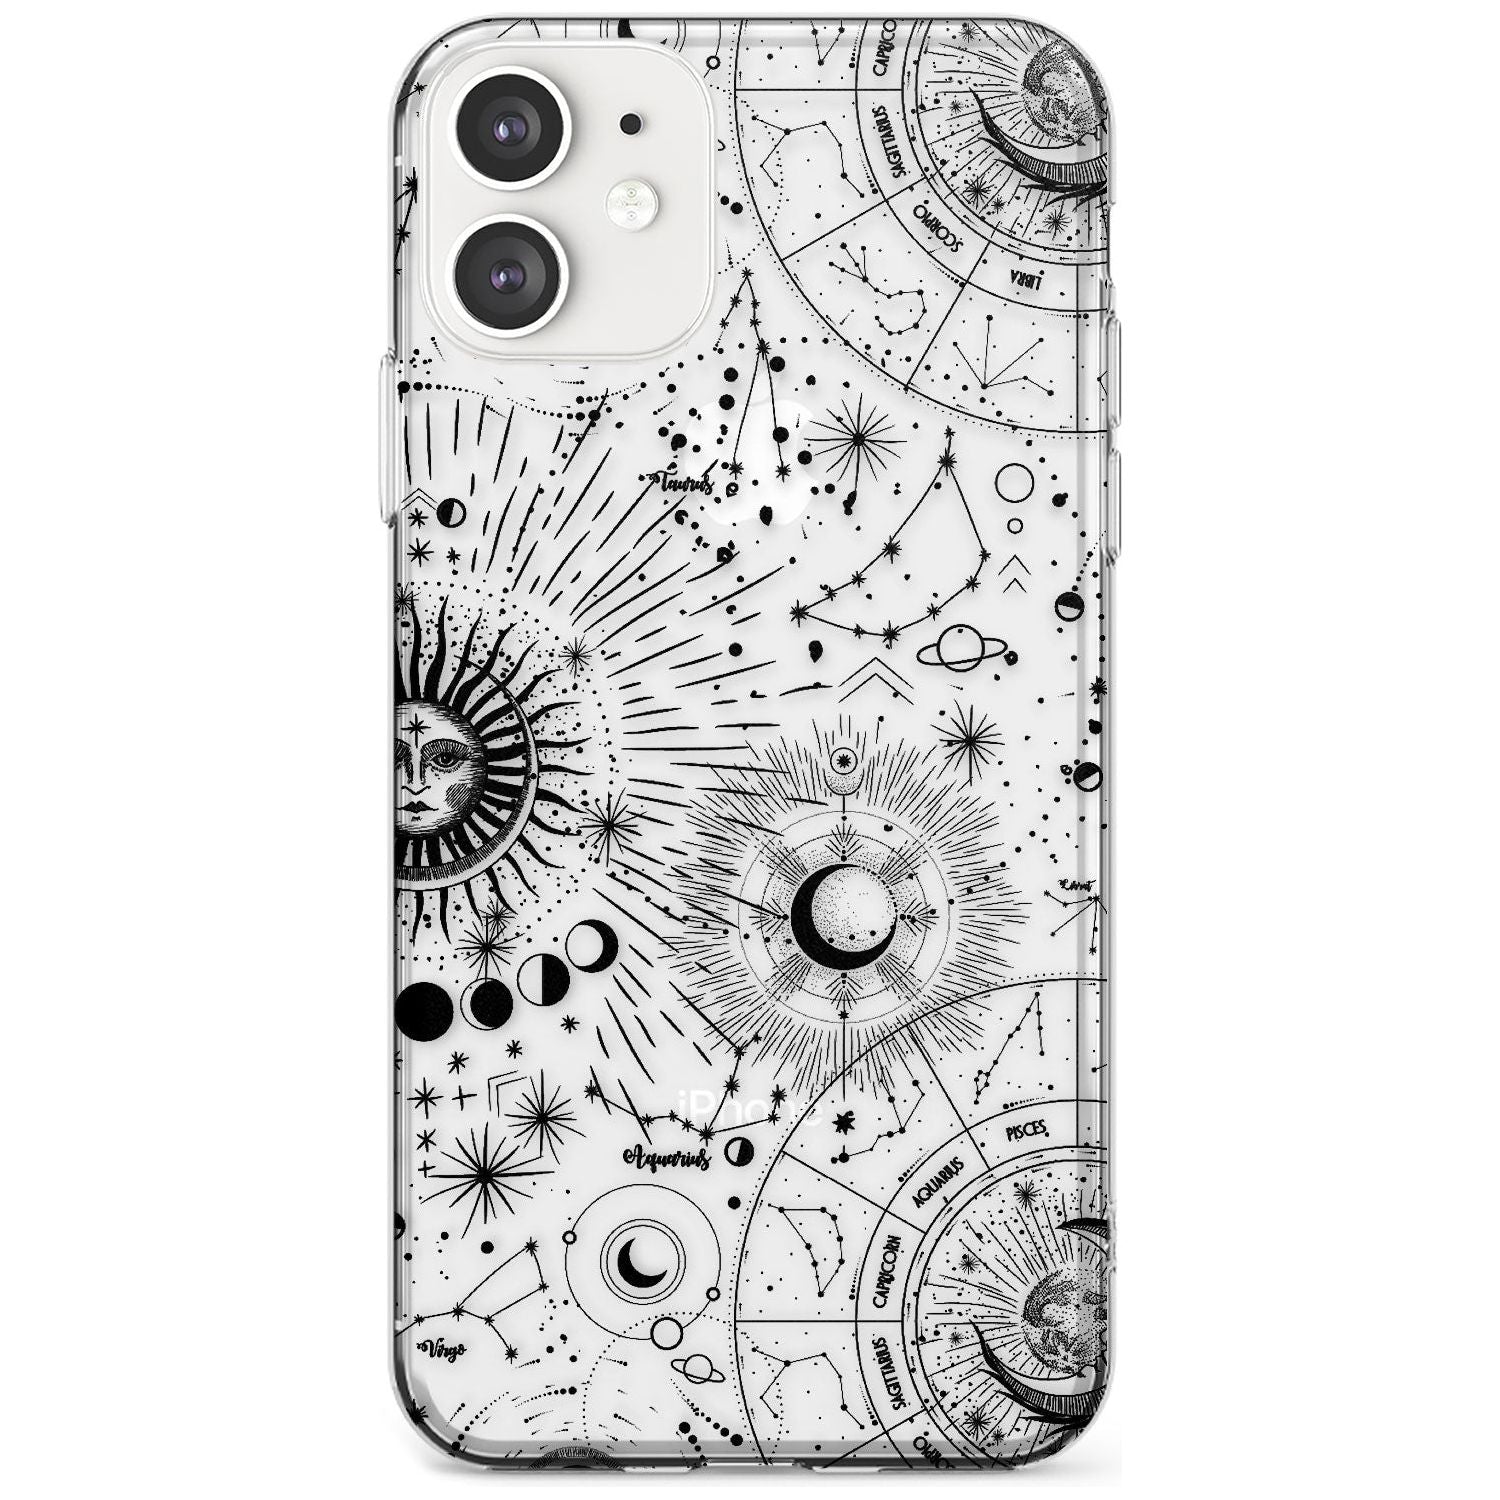 Suns & Constellations Astrological Slim TPU Phone Case for iPhone 11